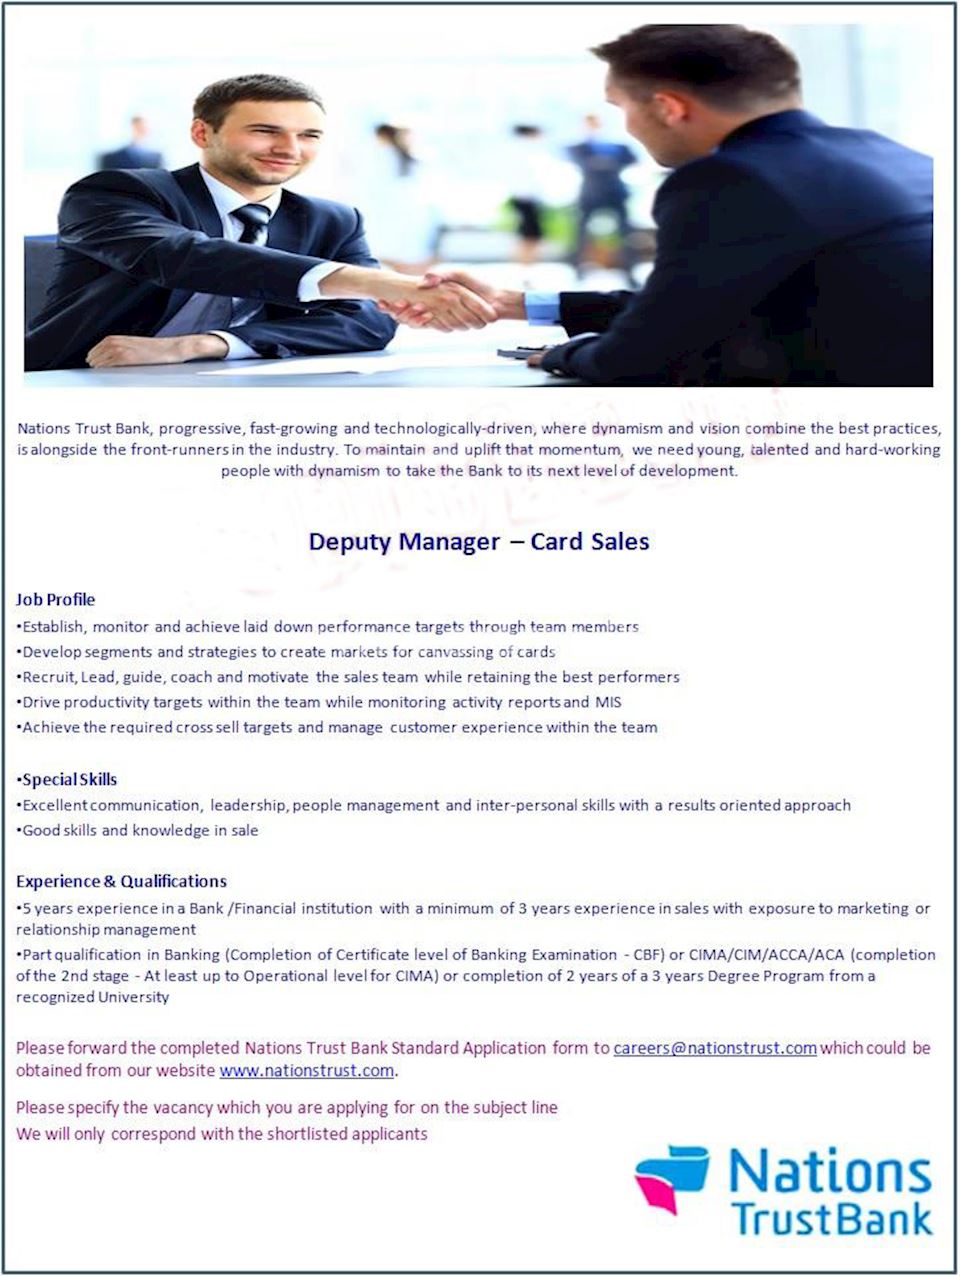 Deputy Manager - Card Sales